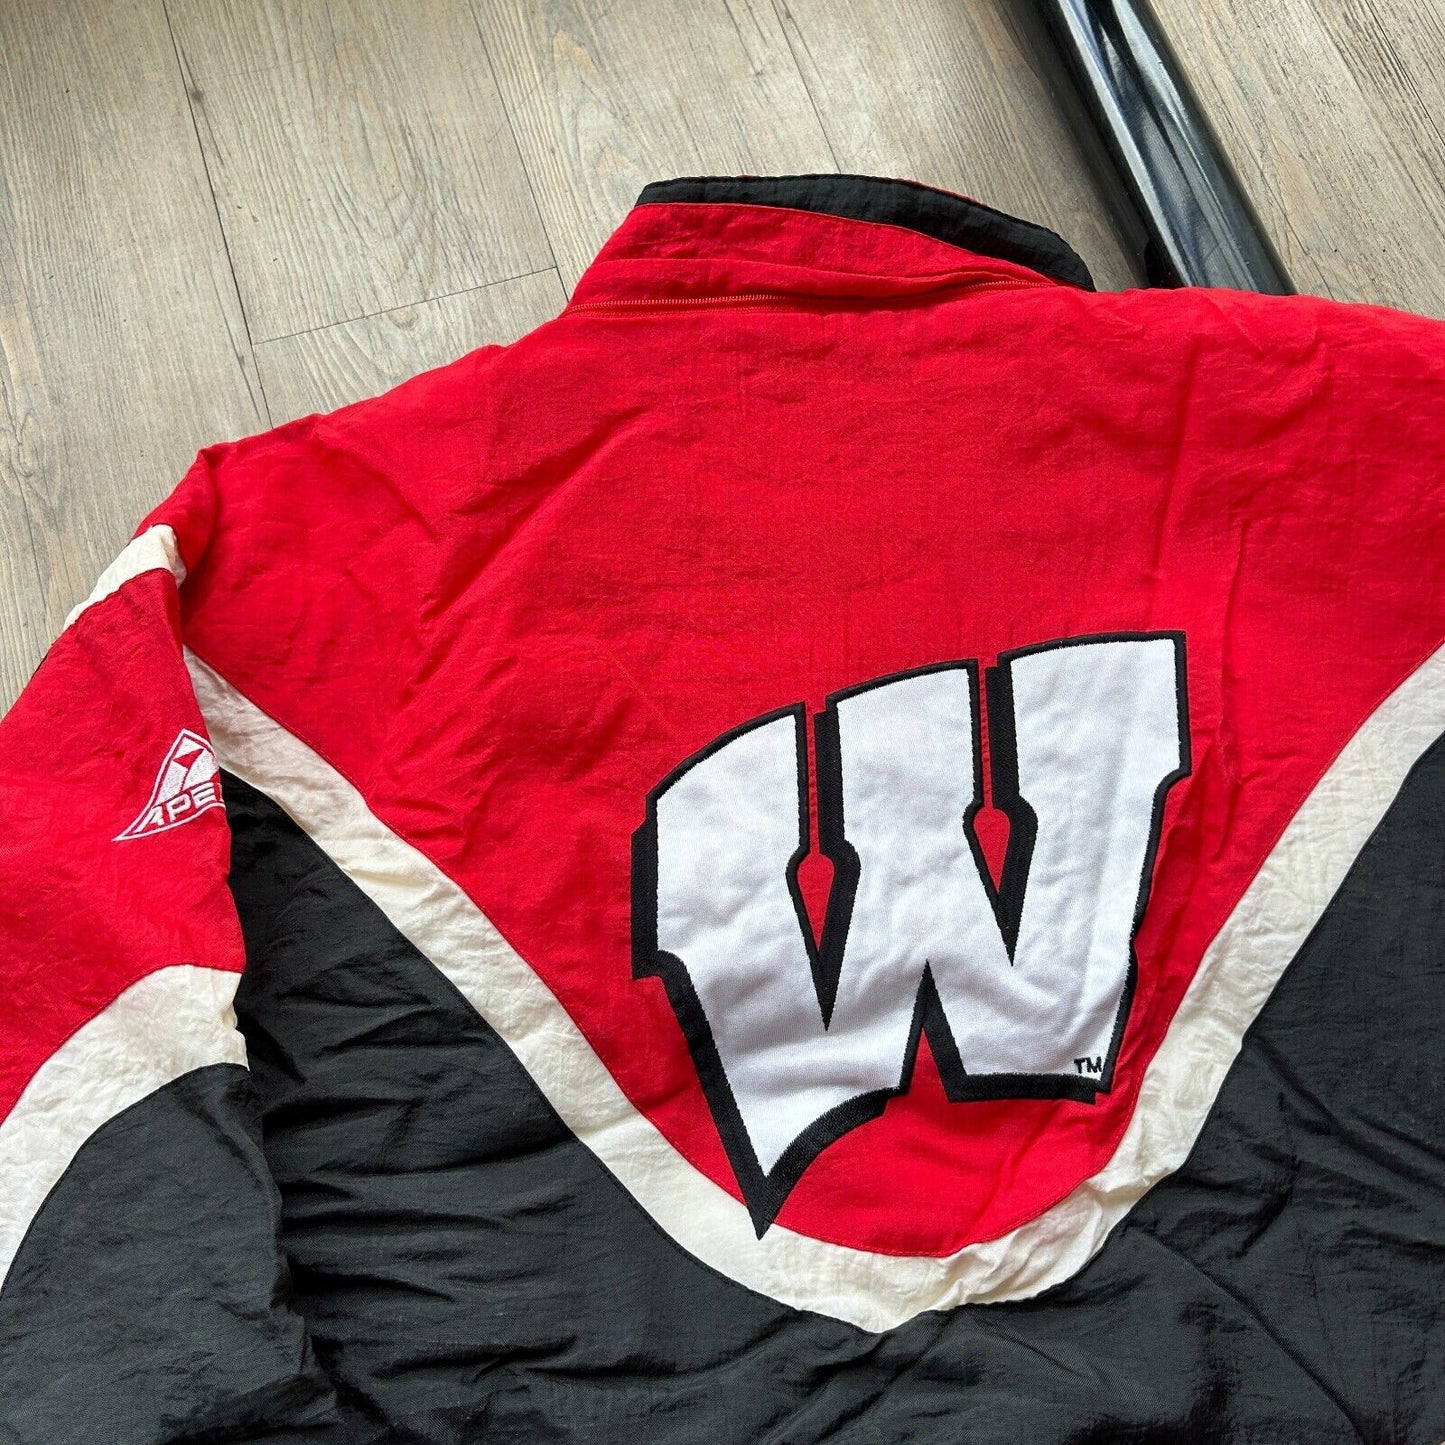 VINTAGE 90s | Wisconsin Badgers Apex One College Football Jacket sz XL Adult